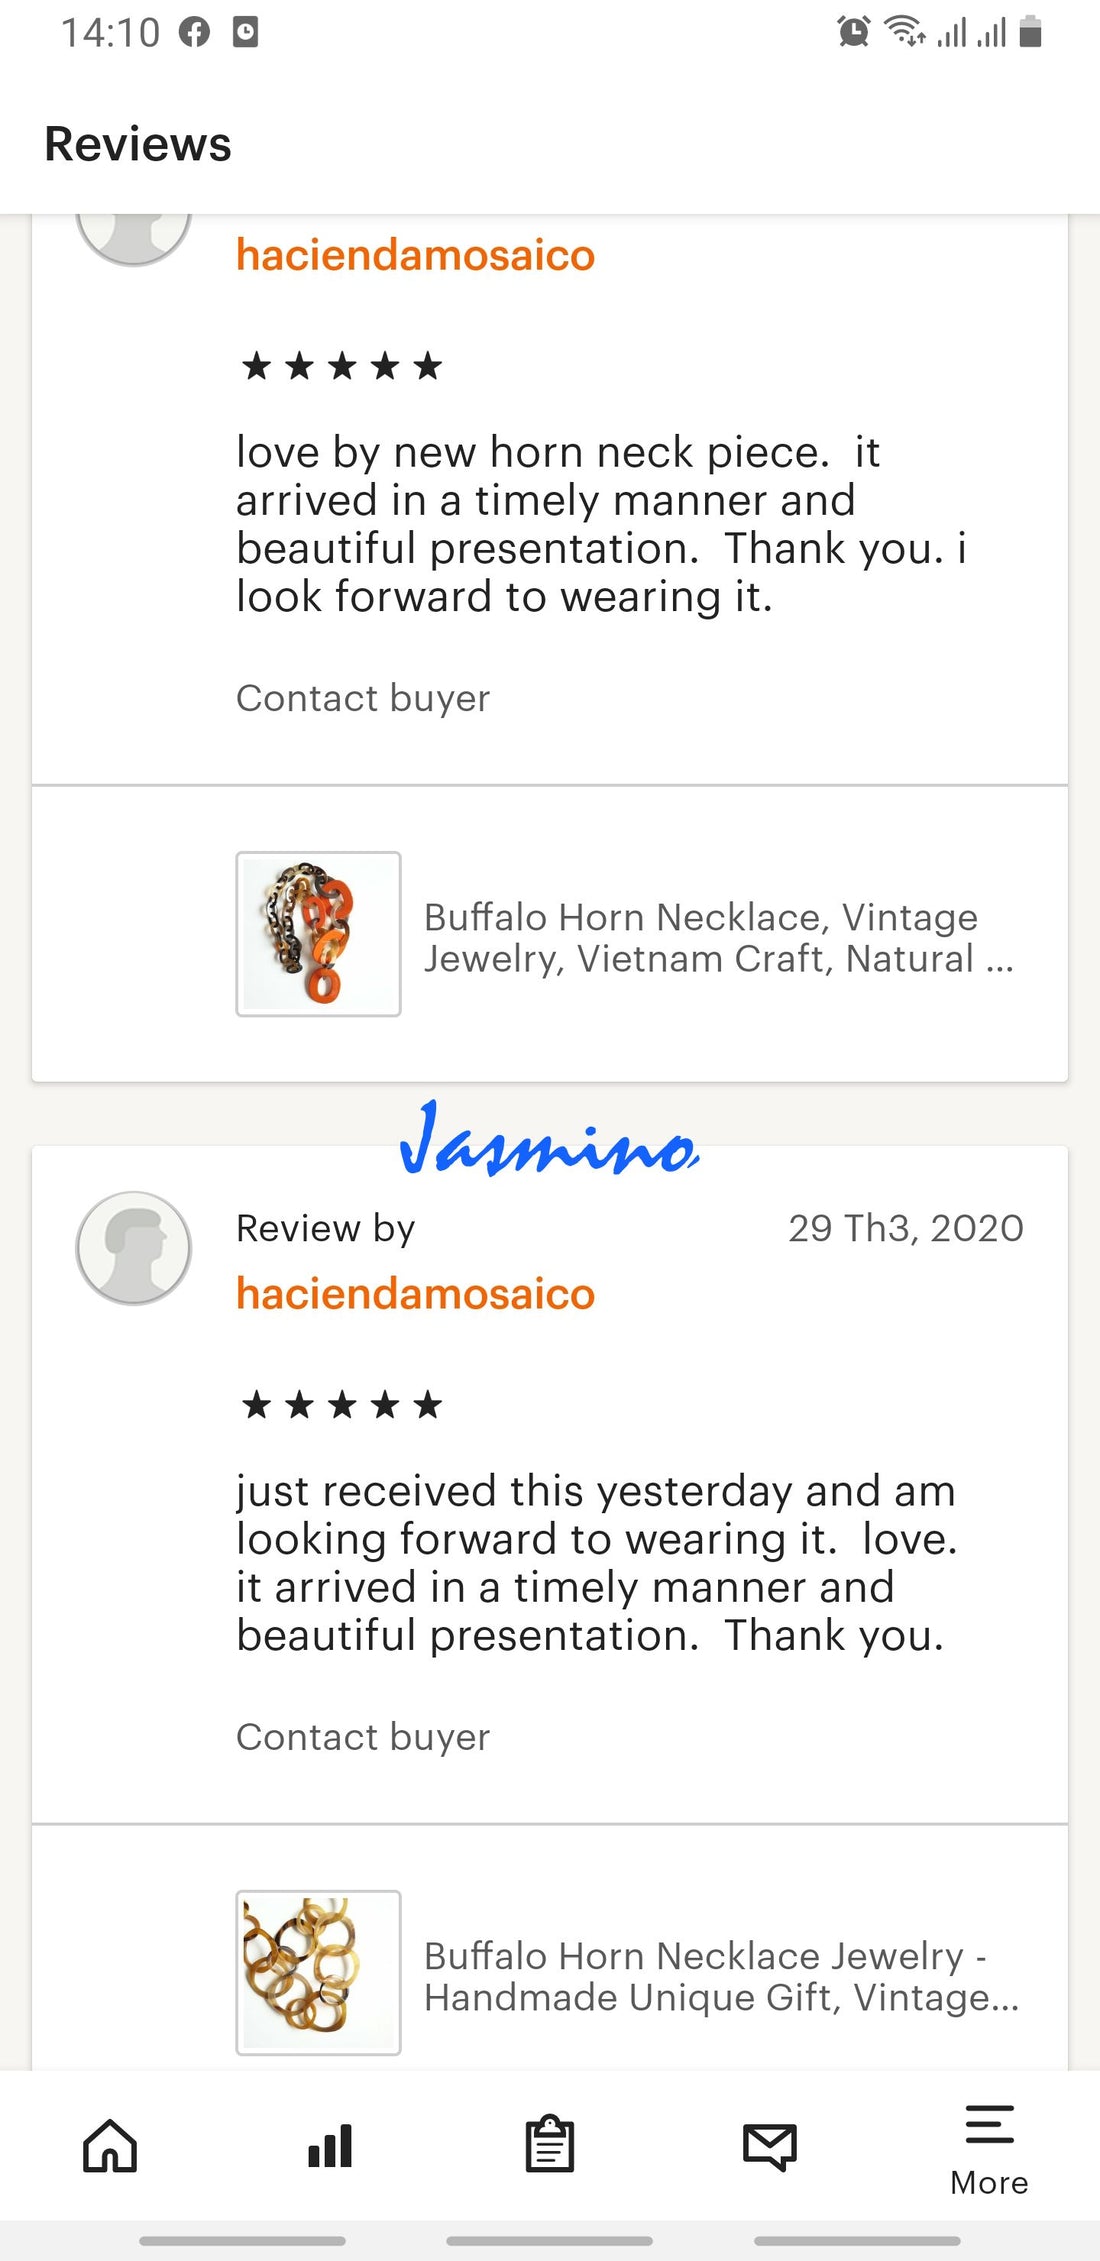 It shows good reviews from two customers to a necklace collection in a handmade accessory shop